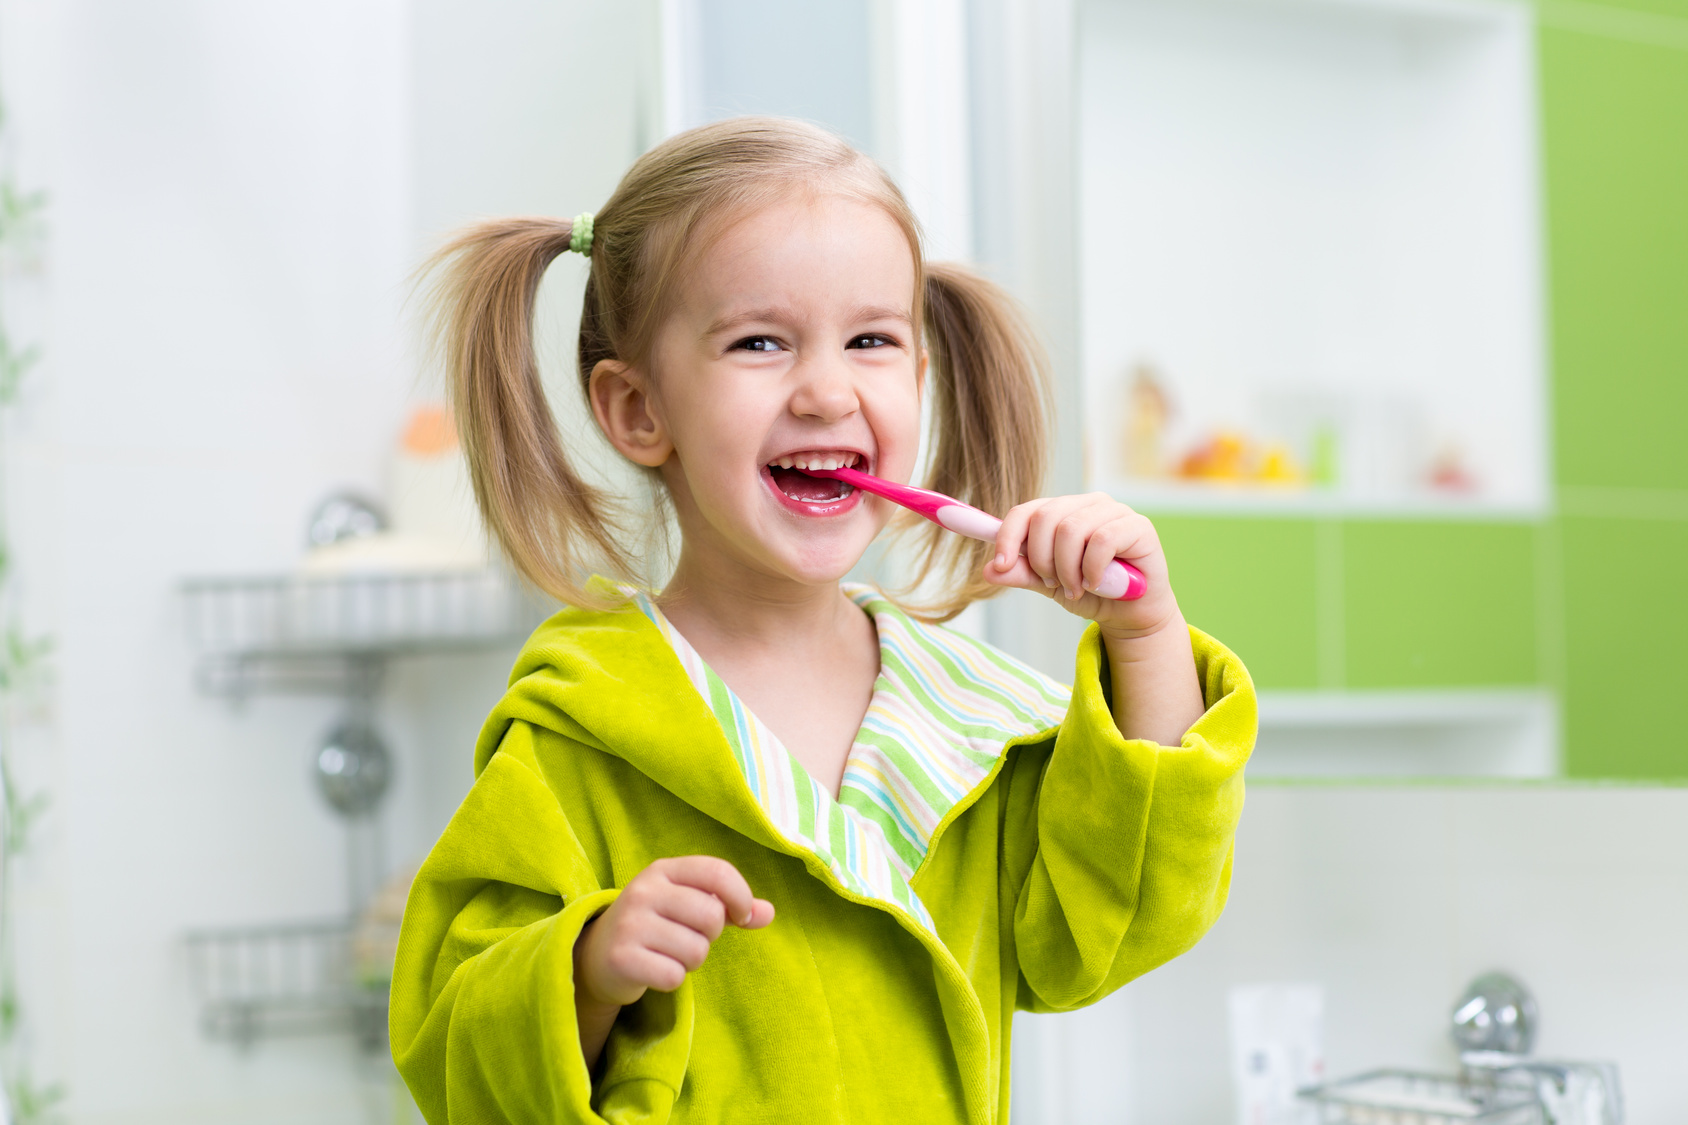 https://www.lakespd.com/wp-content/uploads/2017/04/How-to-Keep-Your-Childs-Toothbrush-Clean.jpg